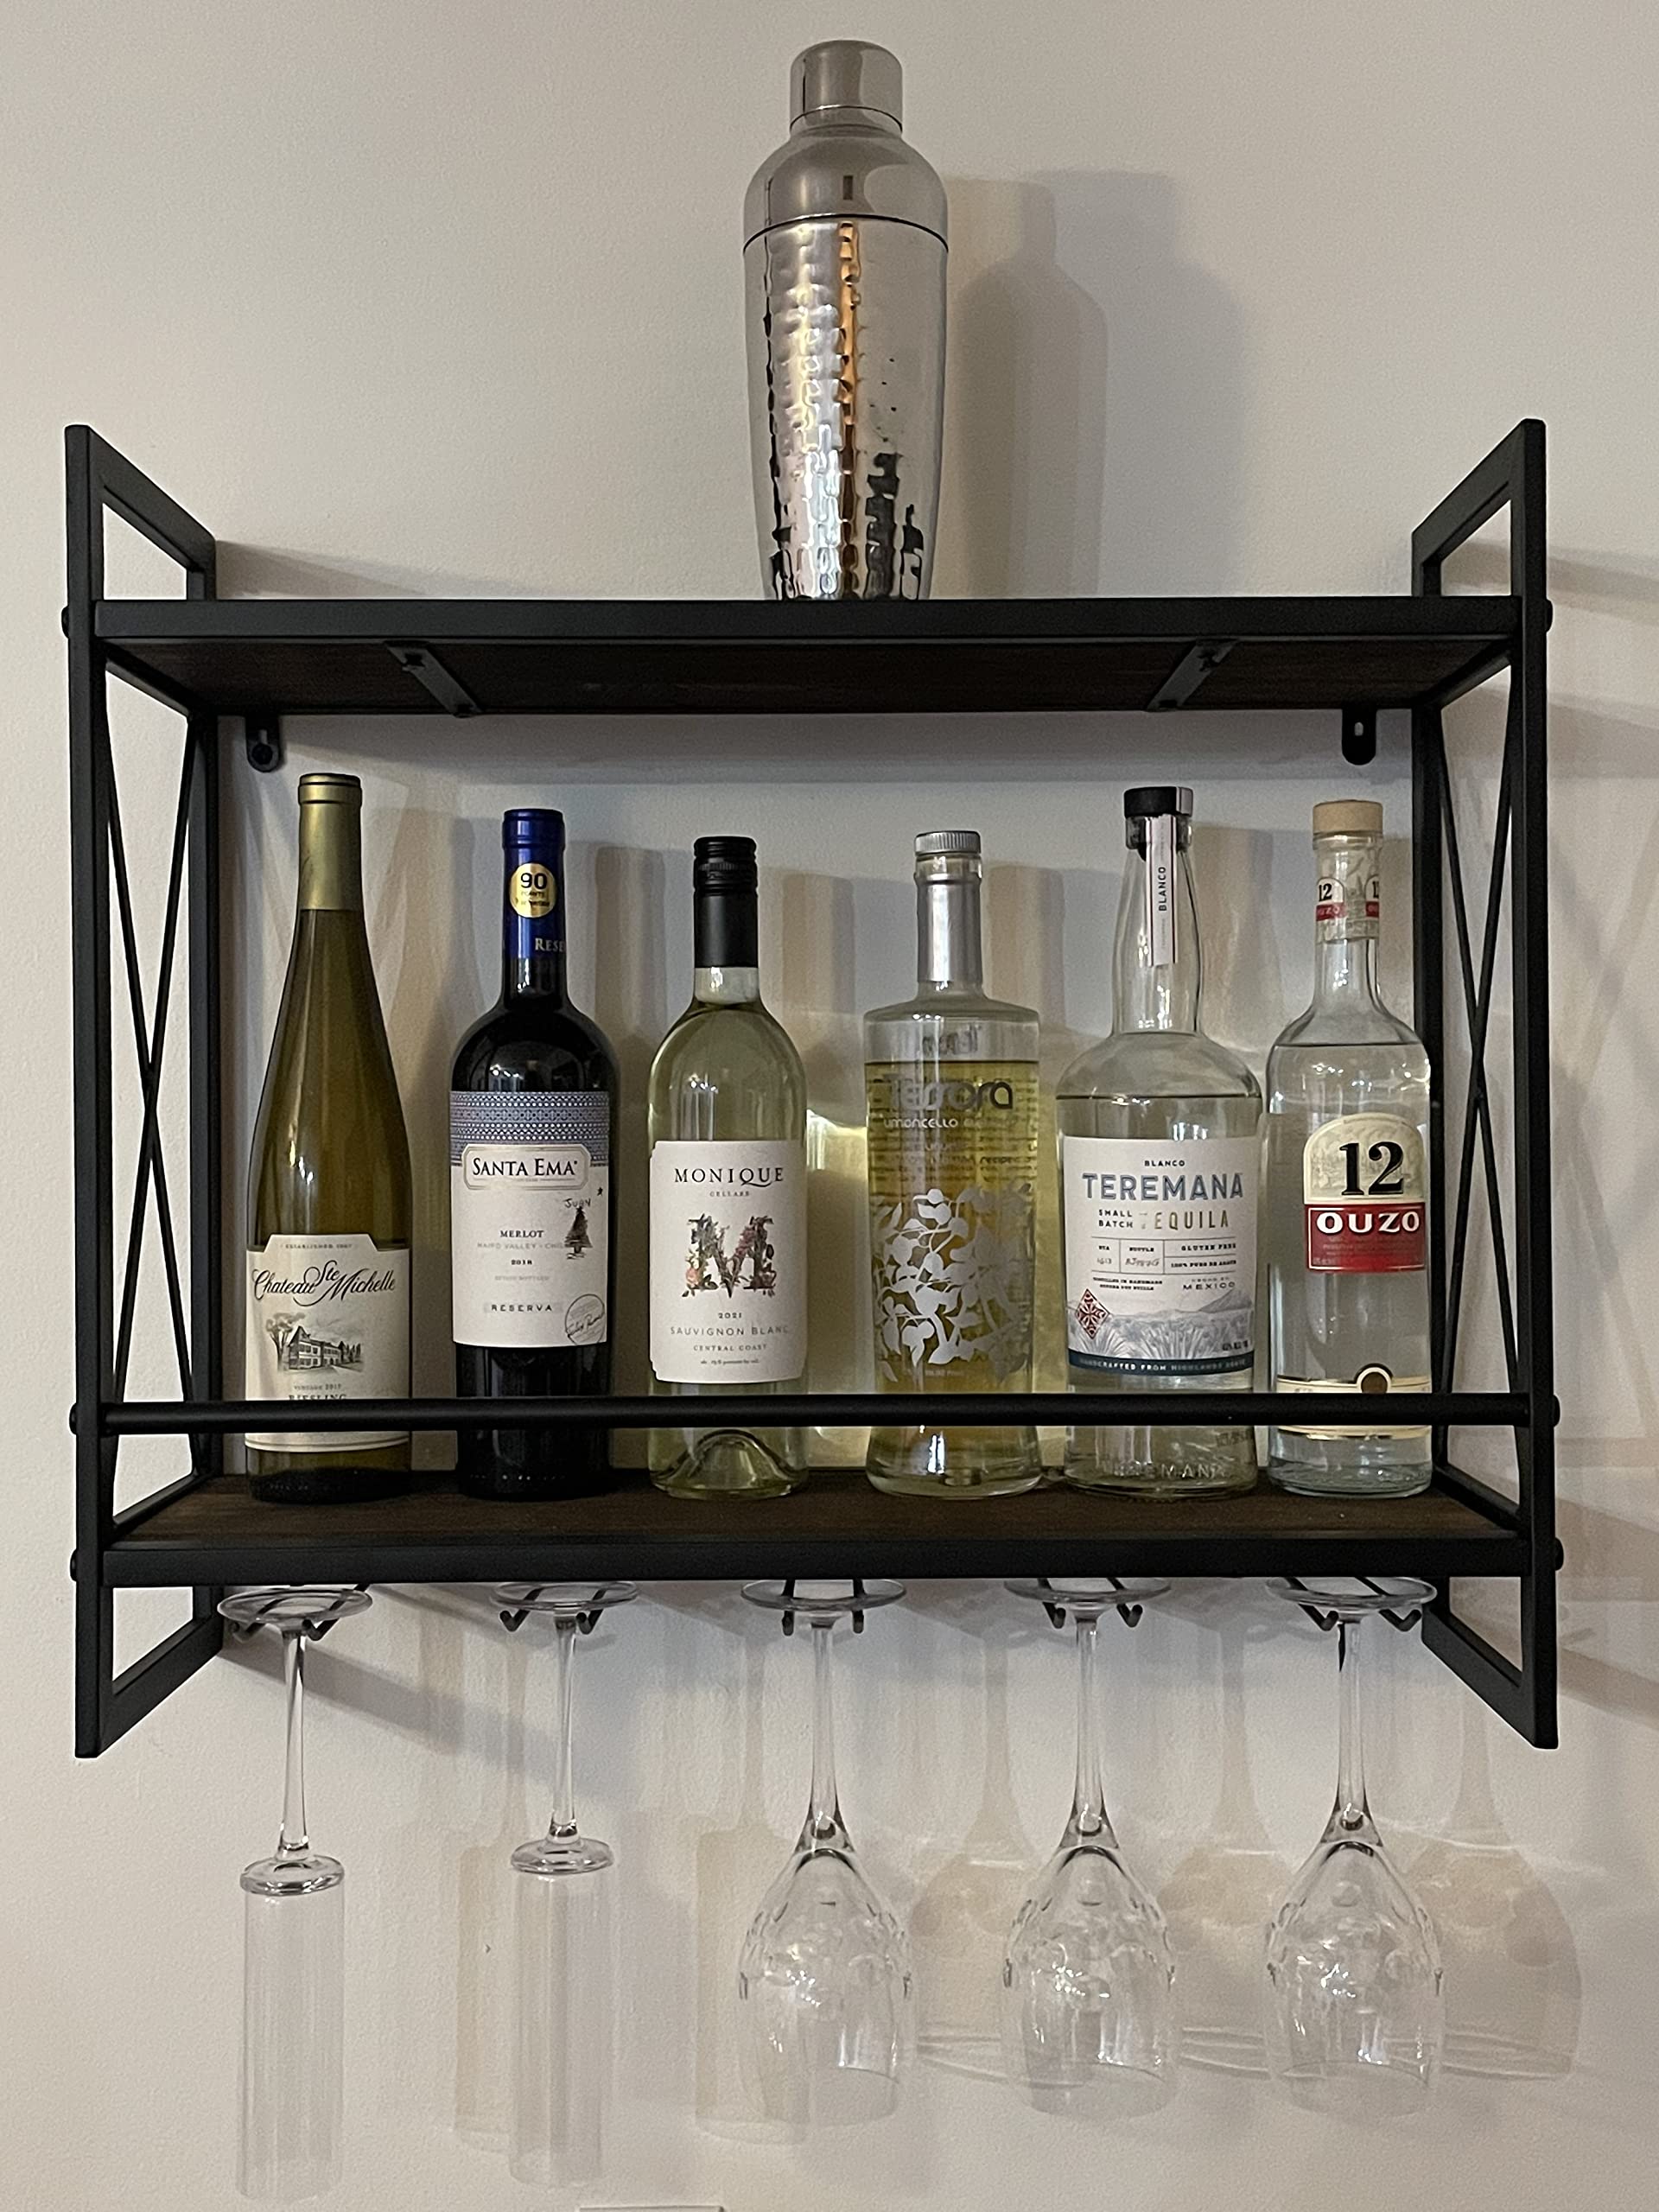 Spartan Saver Industrial Wall-Mounted Wine Rack with Wine Bottle Holder, Floating Bottle Storage Bar, and Wine Glass Holder